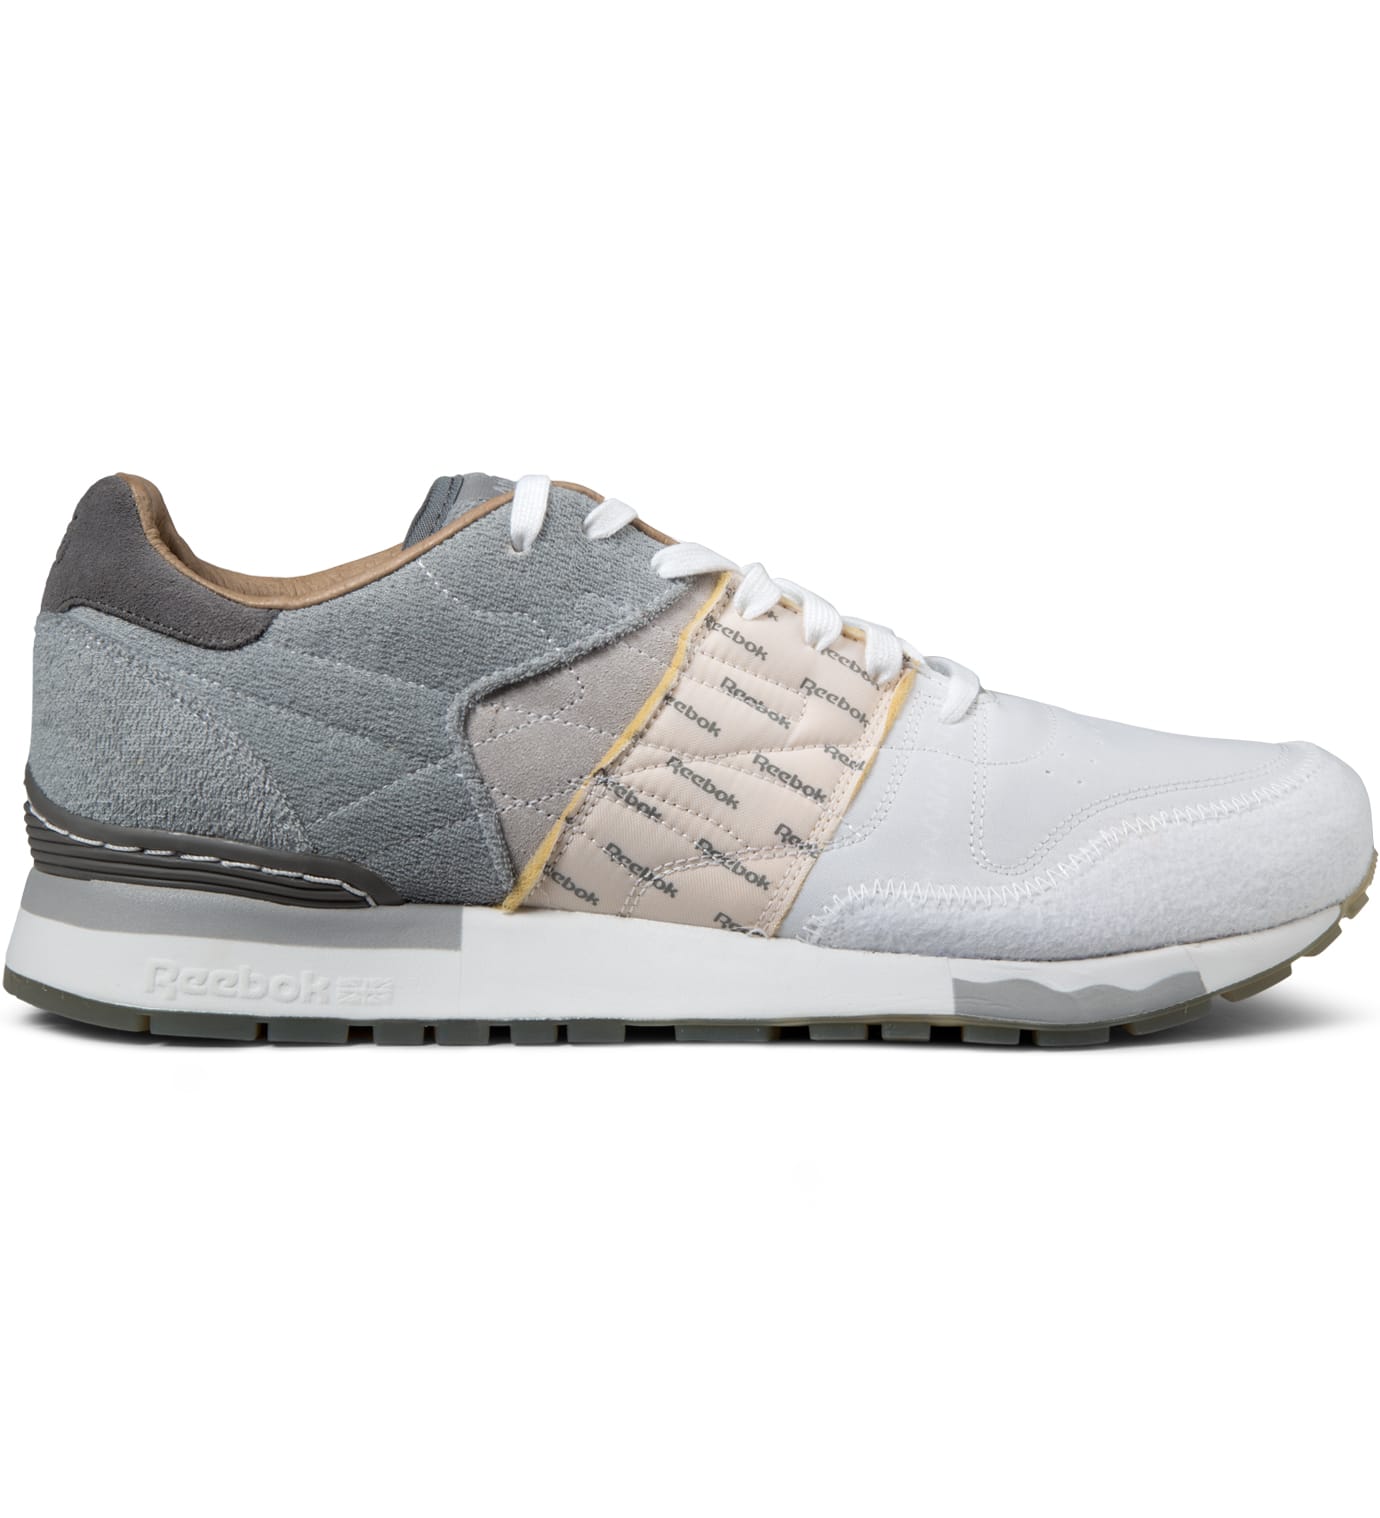 reebok x the garbstore classic leather 6000 grey white steel